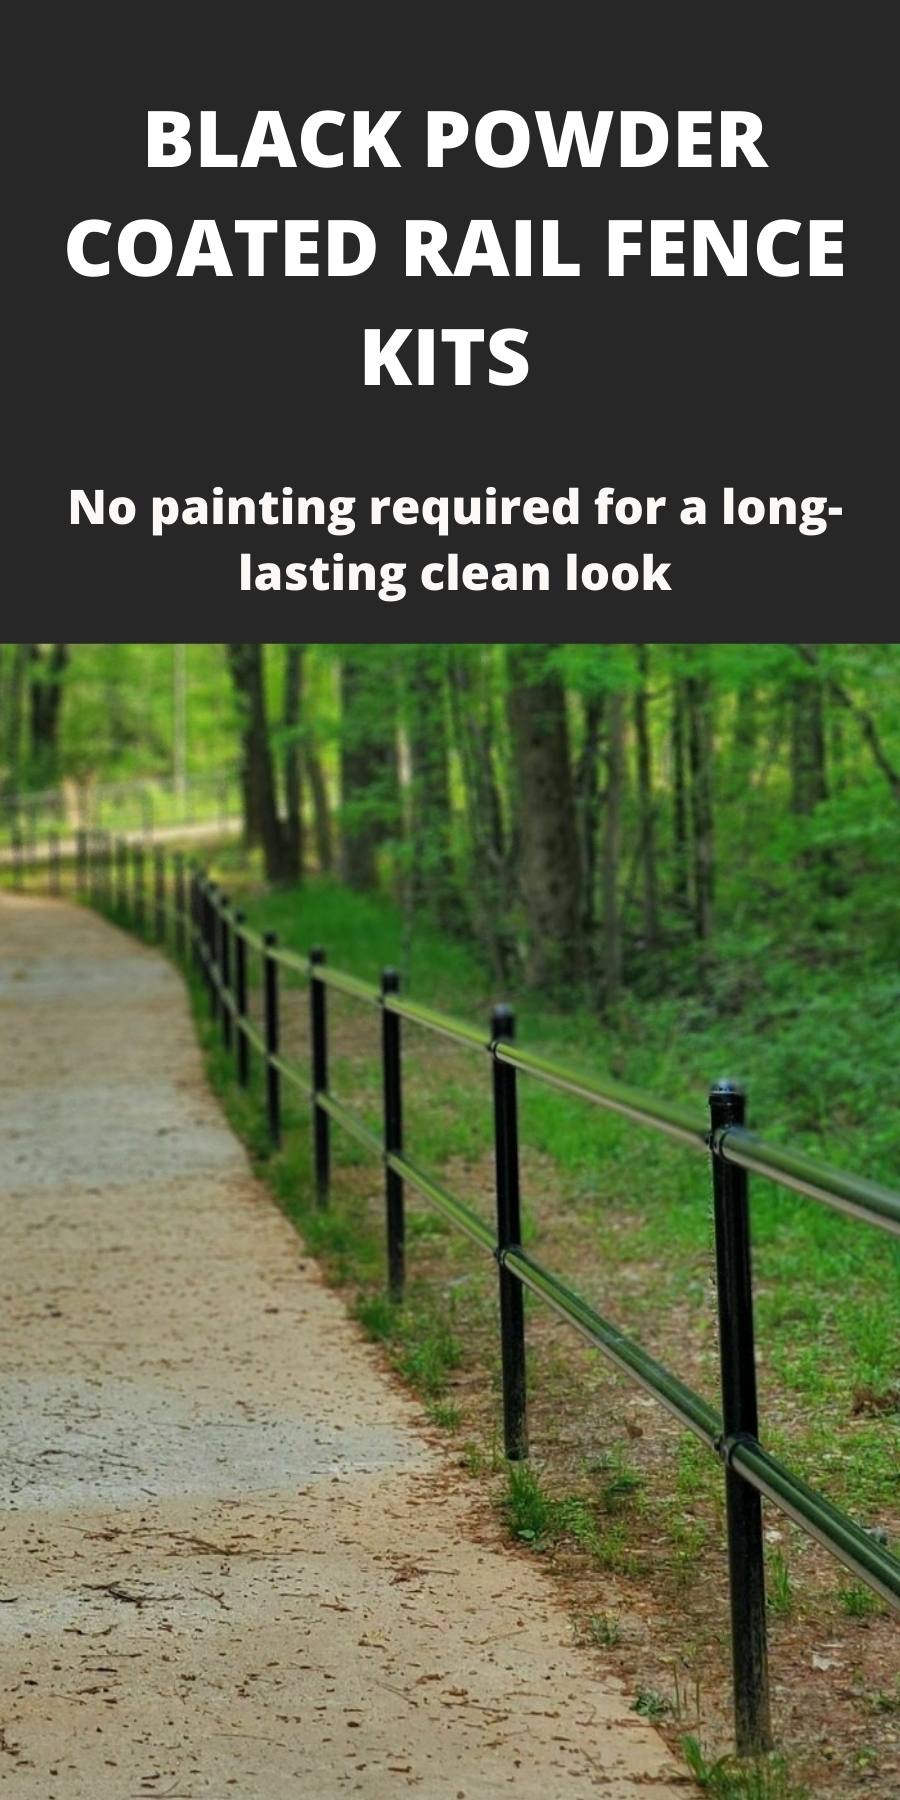 Bullet Fence System's Black powder coated rail fence kits available - no painting required for a long lasting clean look